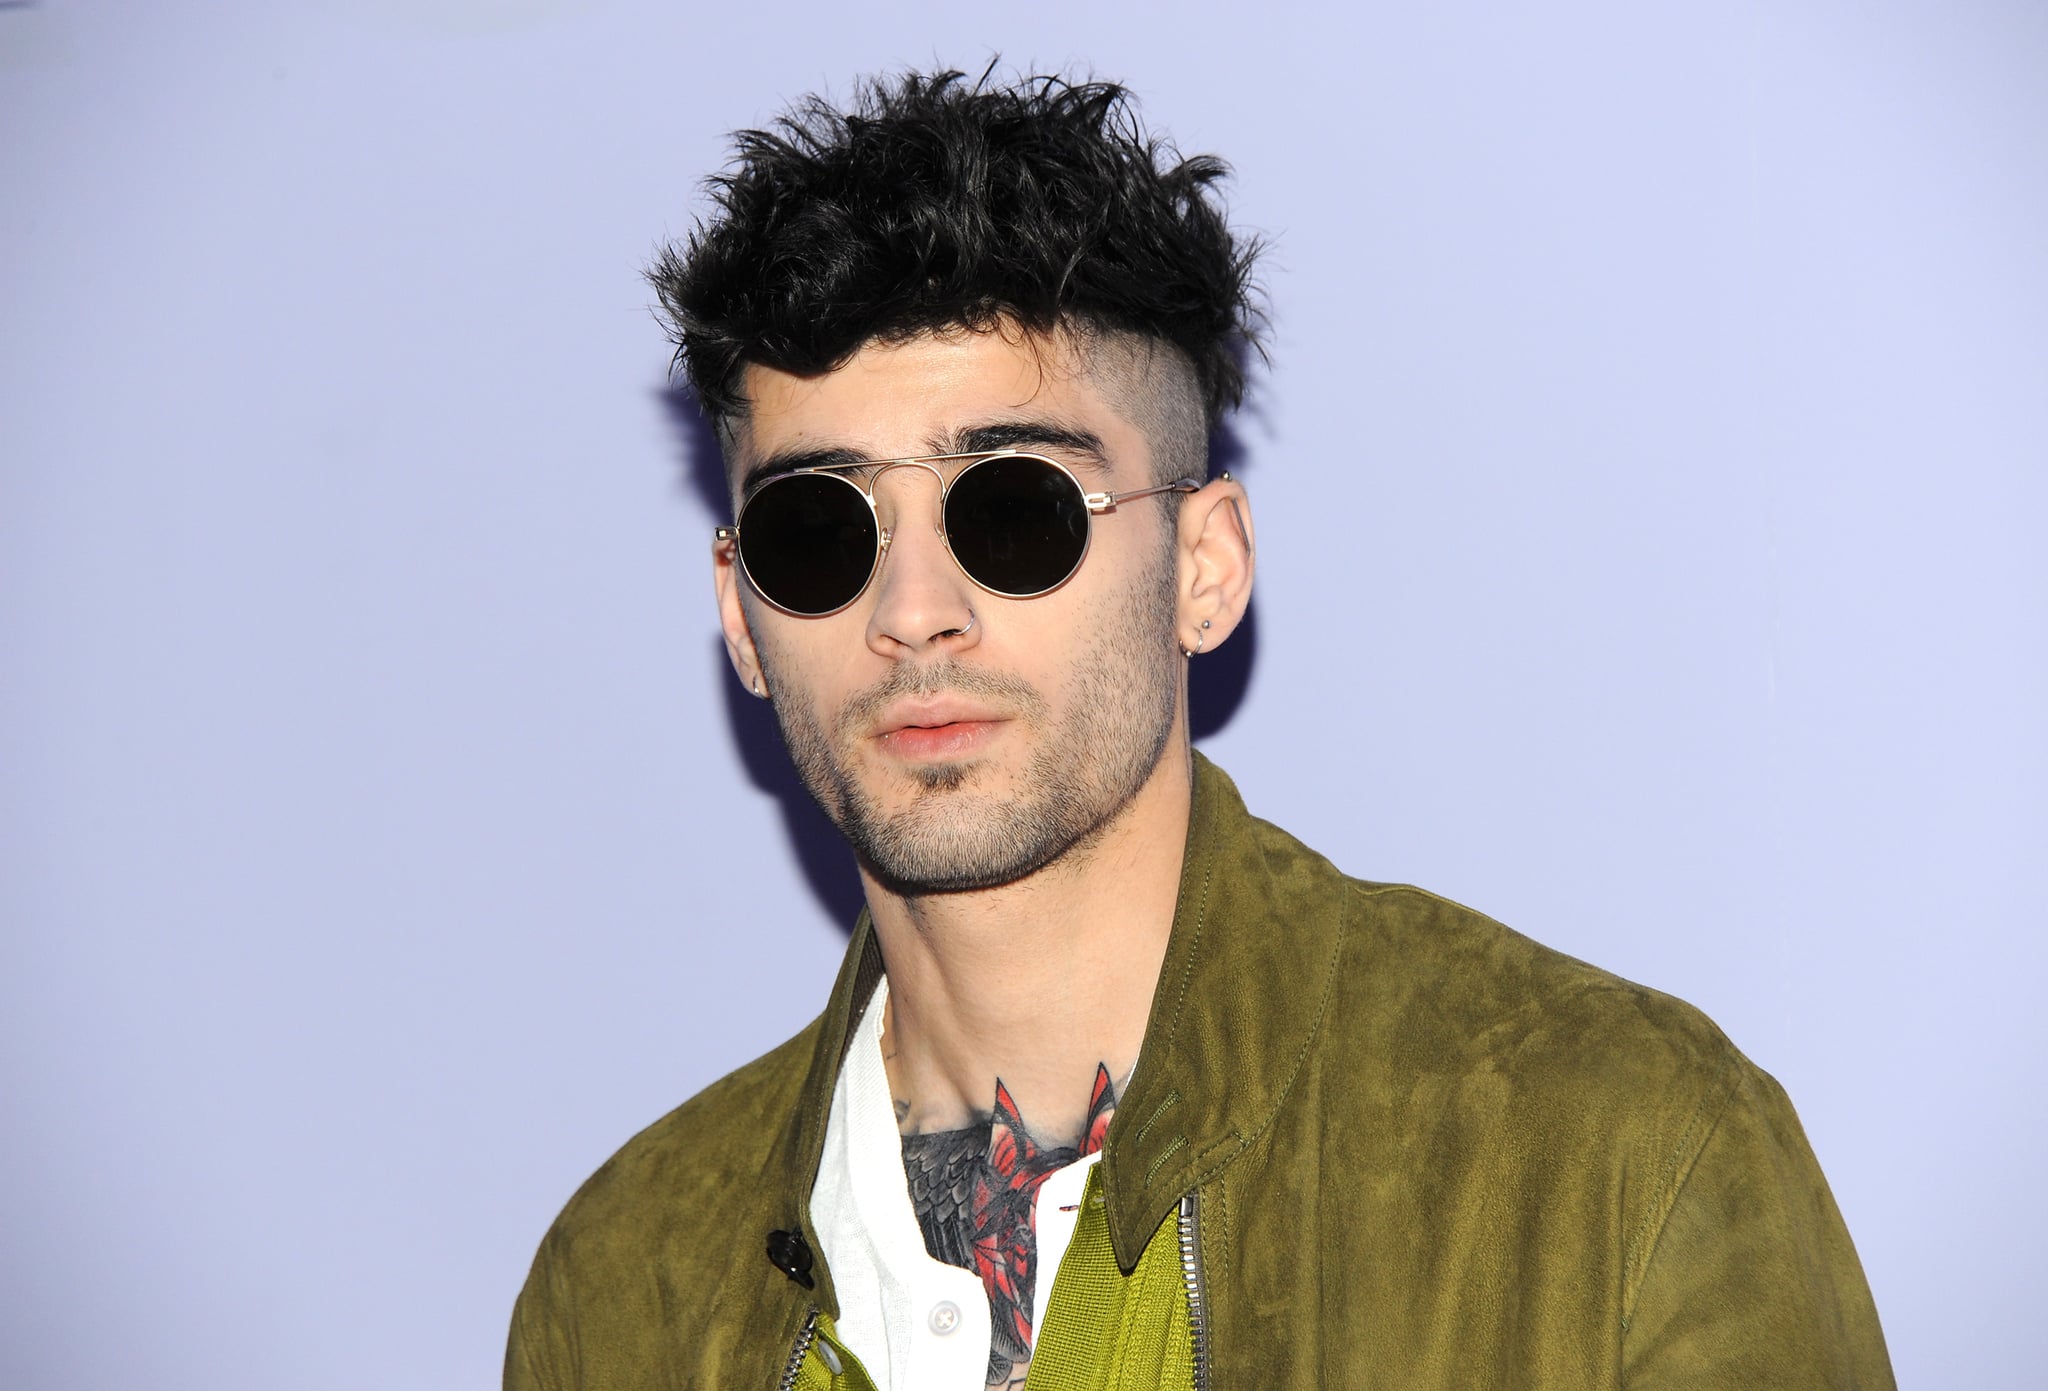 NEW YORK, NY - FEBRUARY 08: Zayn Malik attends Tom Ford Women's Fall/Winter 2018 fashion show during New York Fashion at Park Avenue Armory on February 8, 2018 in New York City.  (Photo by Desiree Navarro/WireImage)